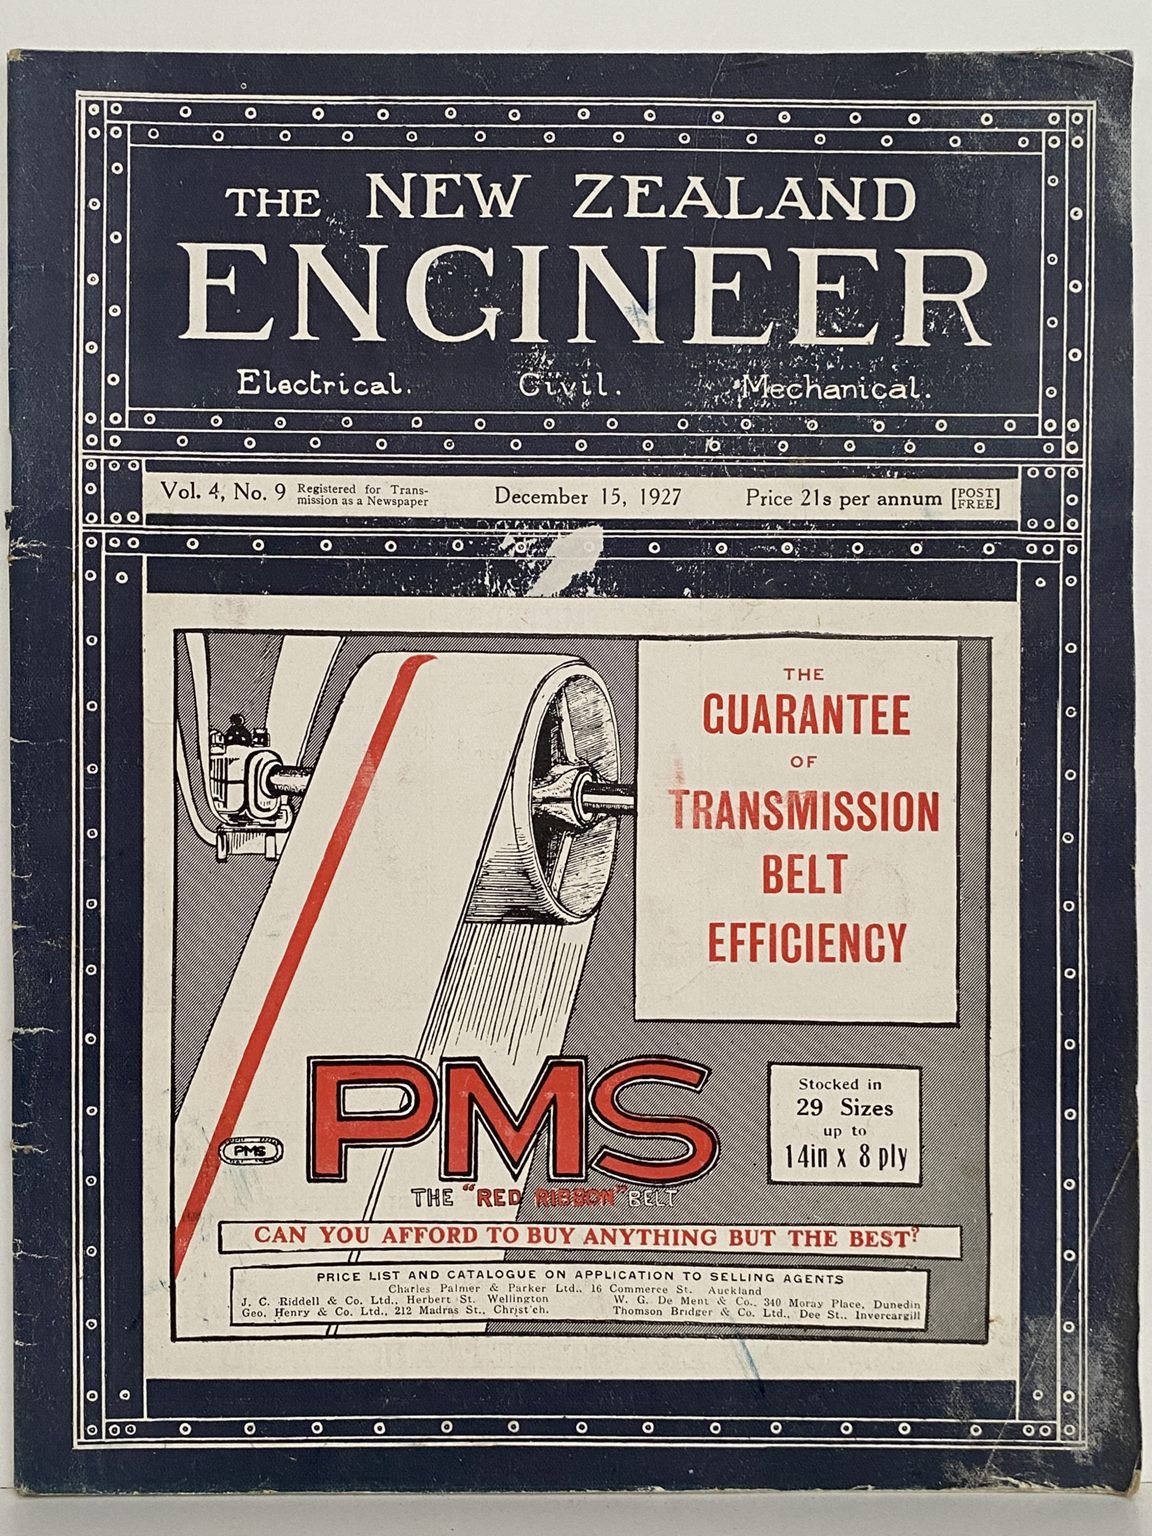 OLD MAGAZINE: The New Zealand Engineer Vol. 4, No. 9 - 15 December 1927